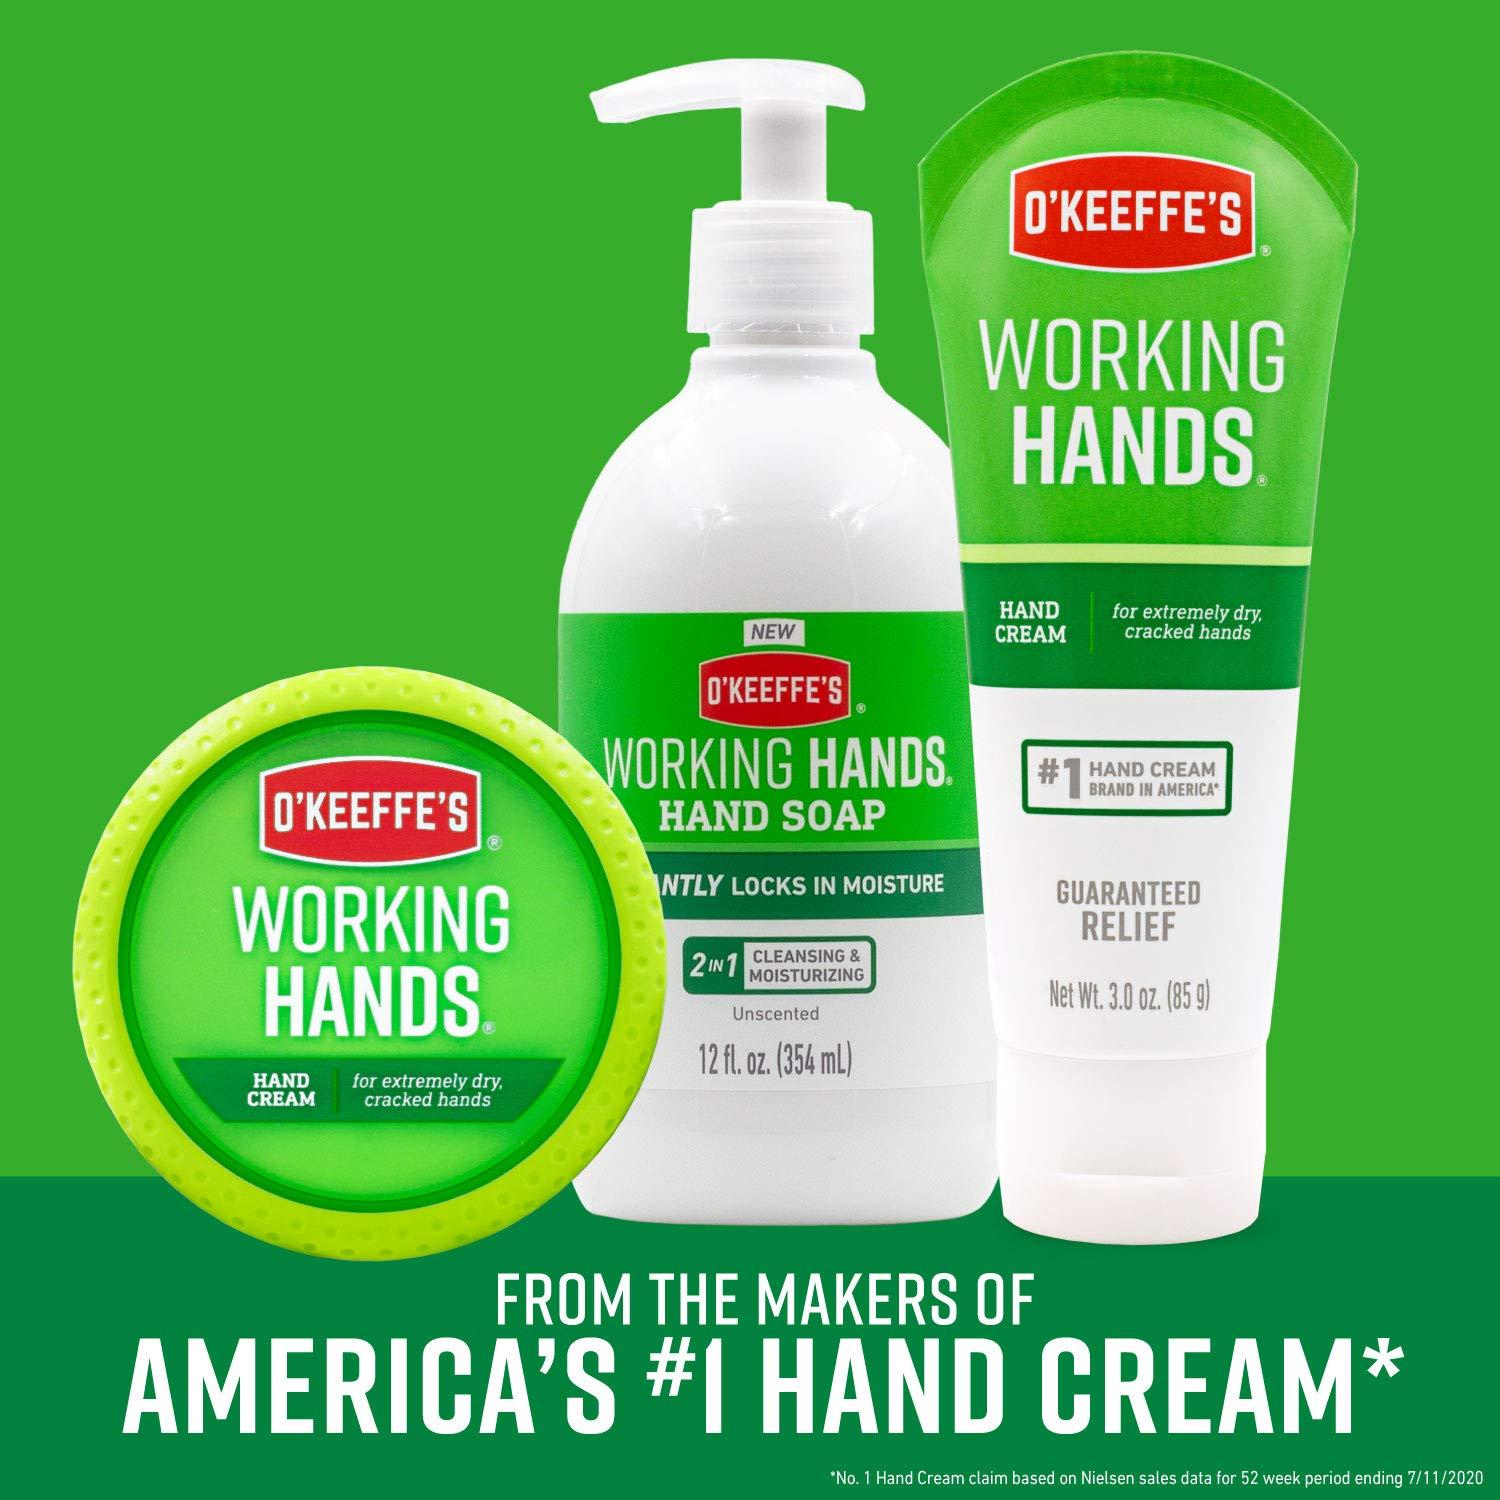 O'Keeffe's Working Hands Hand Cream for Extremely Dry, Cracked Hands, 3.4  Ounce Jar, (Pack 1)